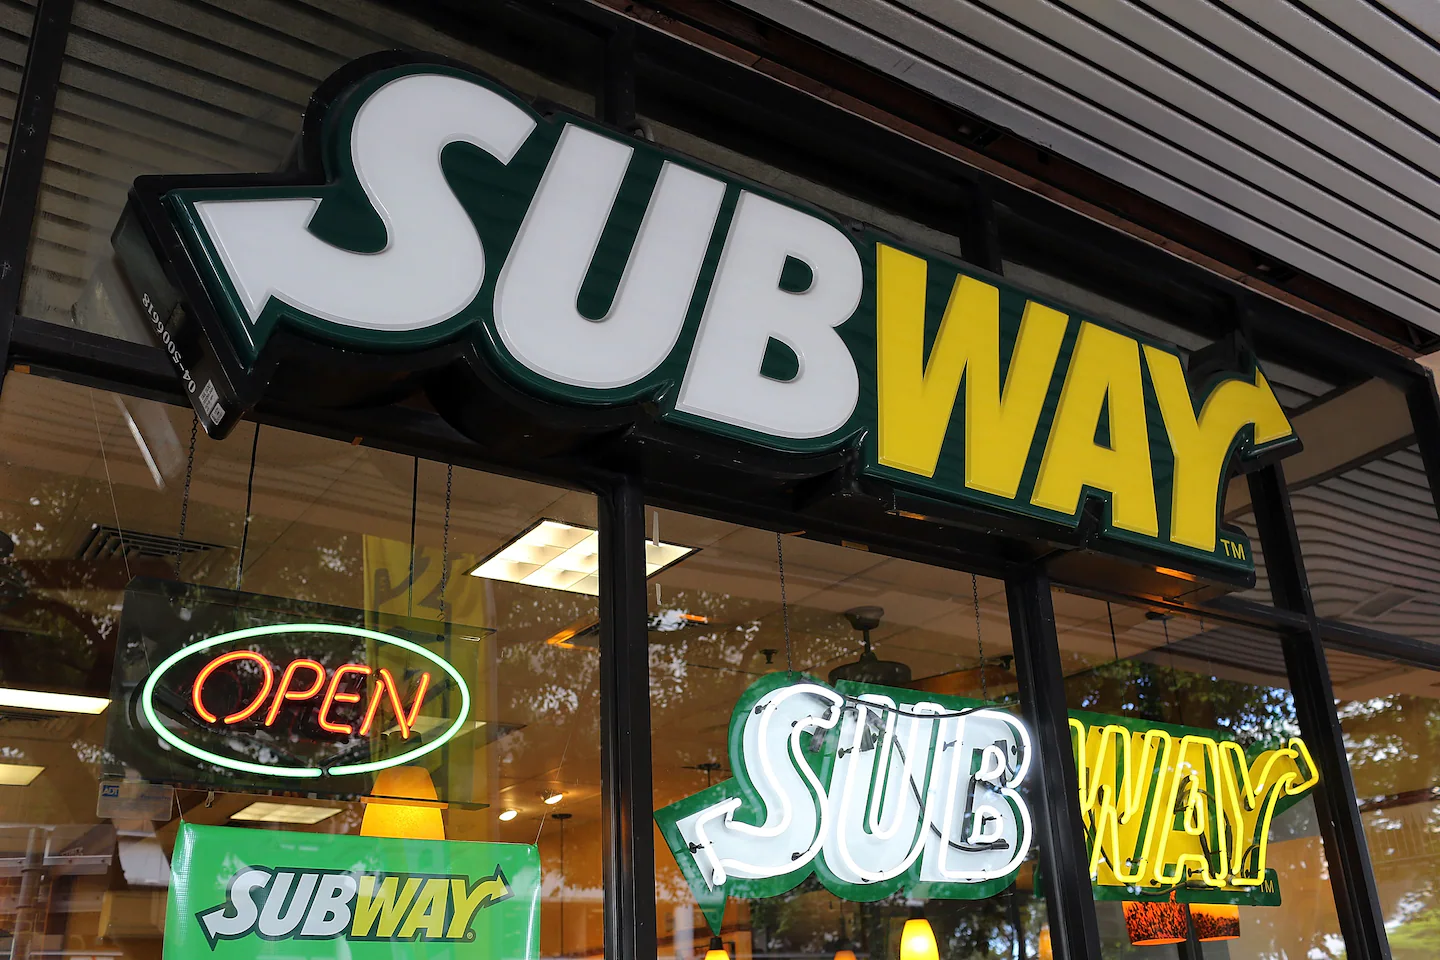 Subway tuna lawsuit still hangs over the chain’s head after ruling